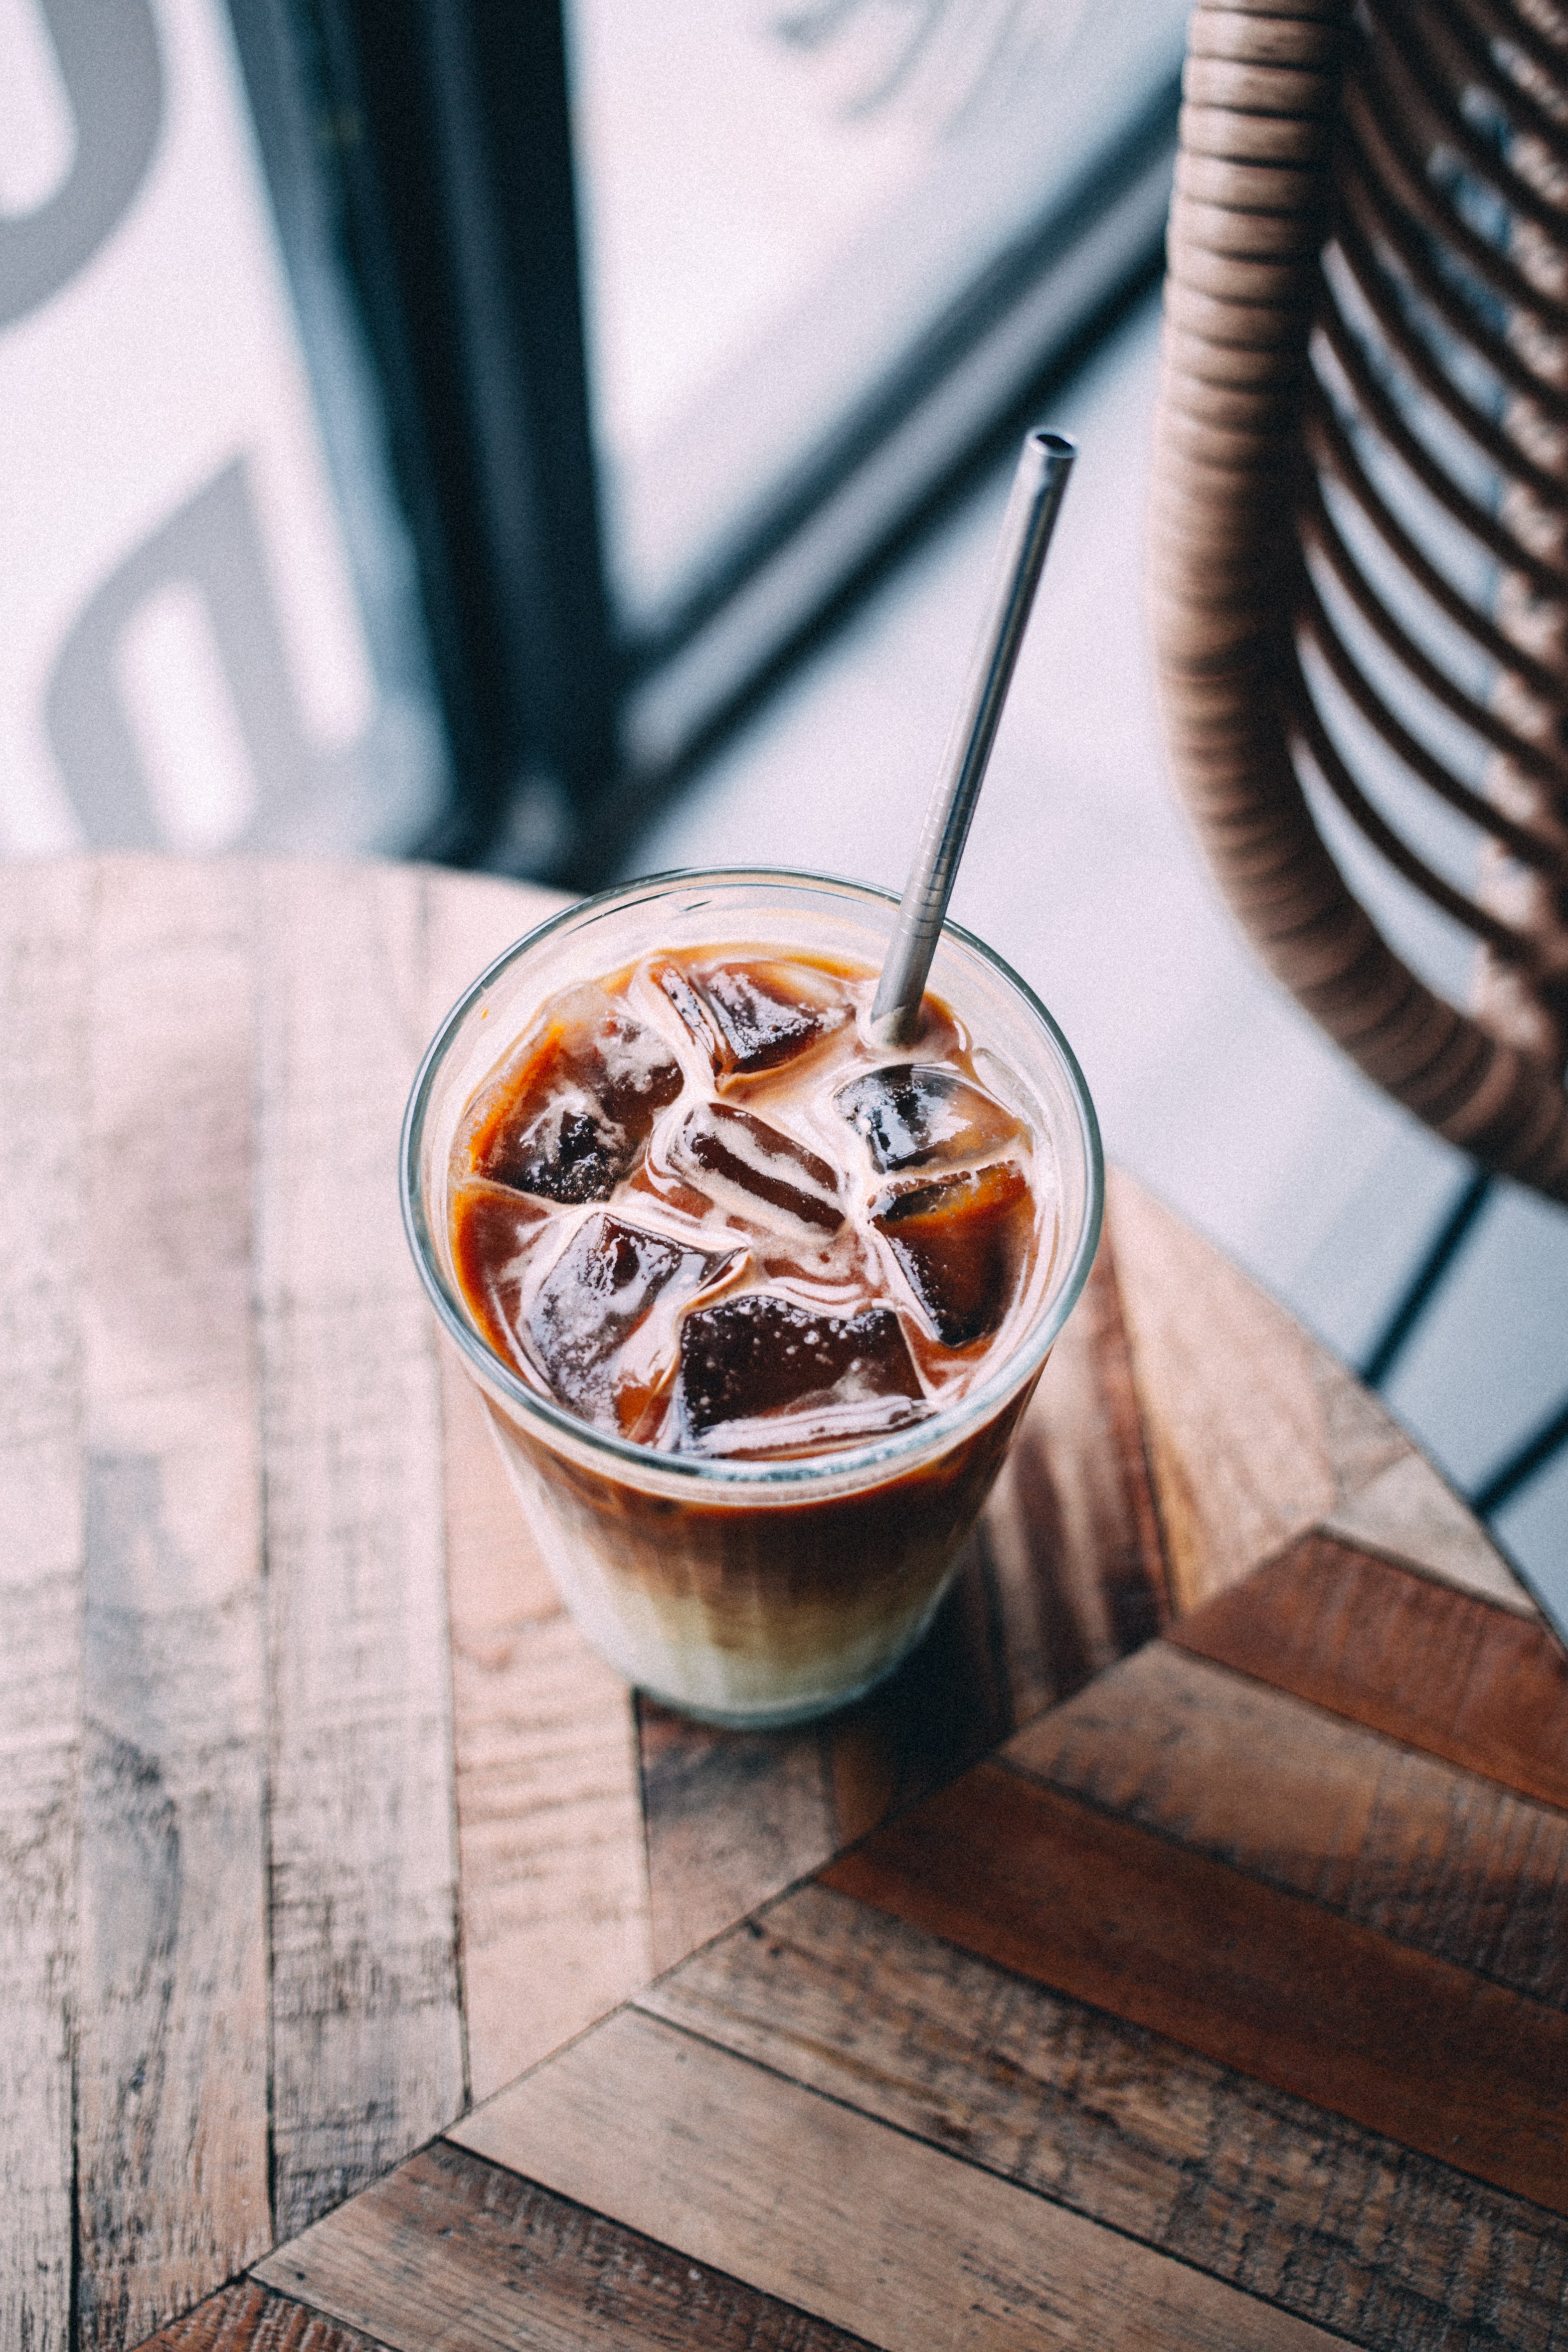 https://burst.shopifycdn.com/photos/coffee-shop-table-with-iced-latte.jpg?exif=0&iptc=0